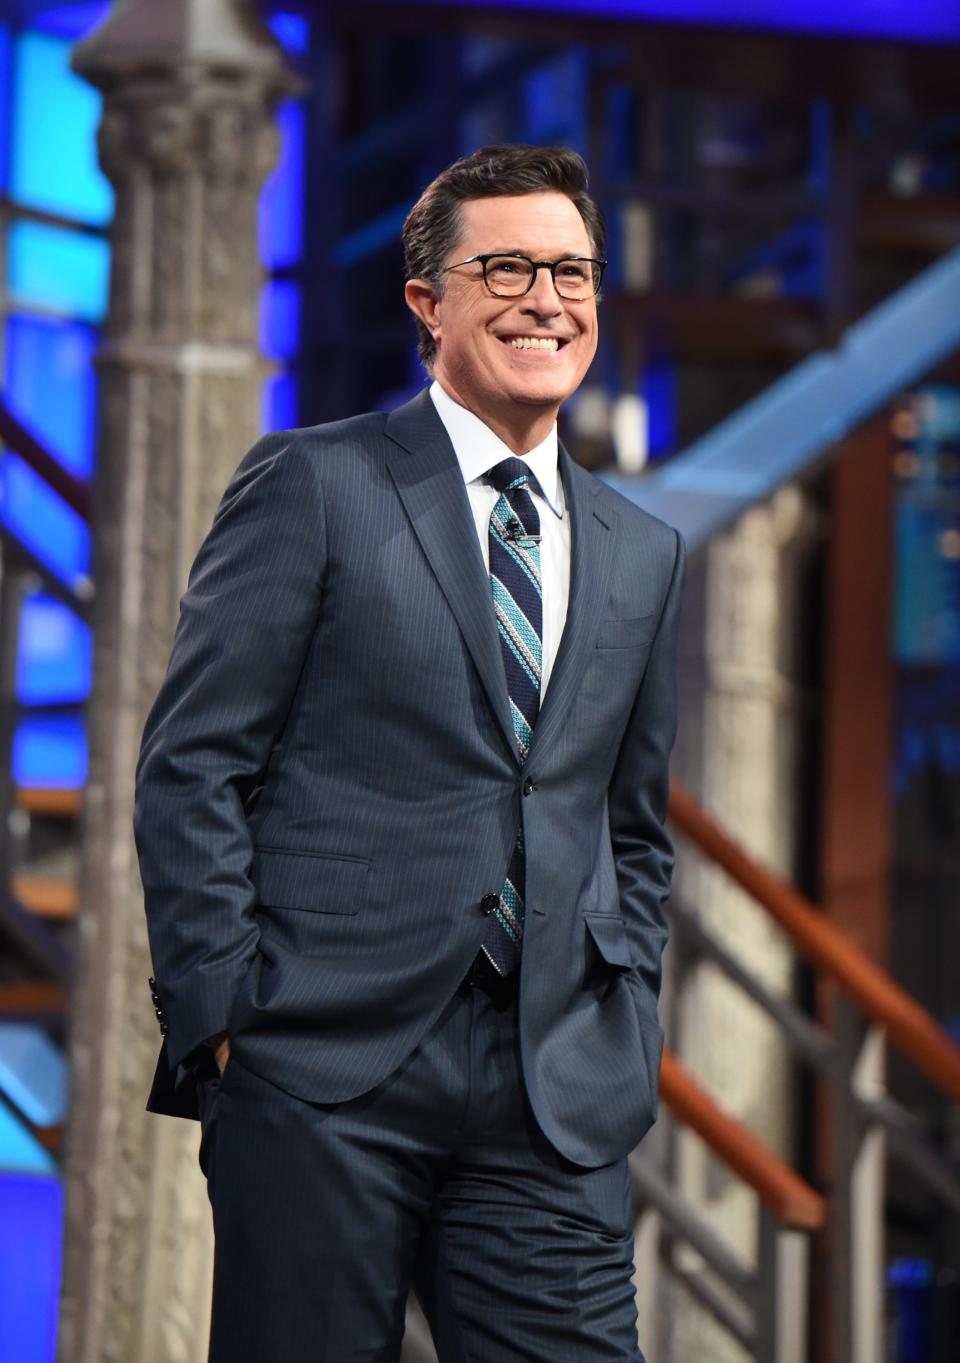 "Last Show" host Stephen Colbert took to Showtime Tuesday night for a live election special.